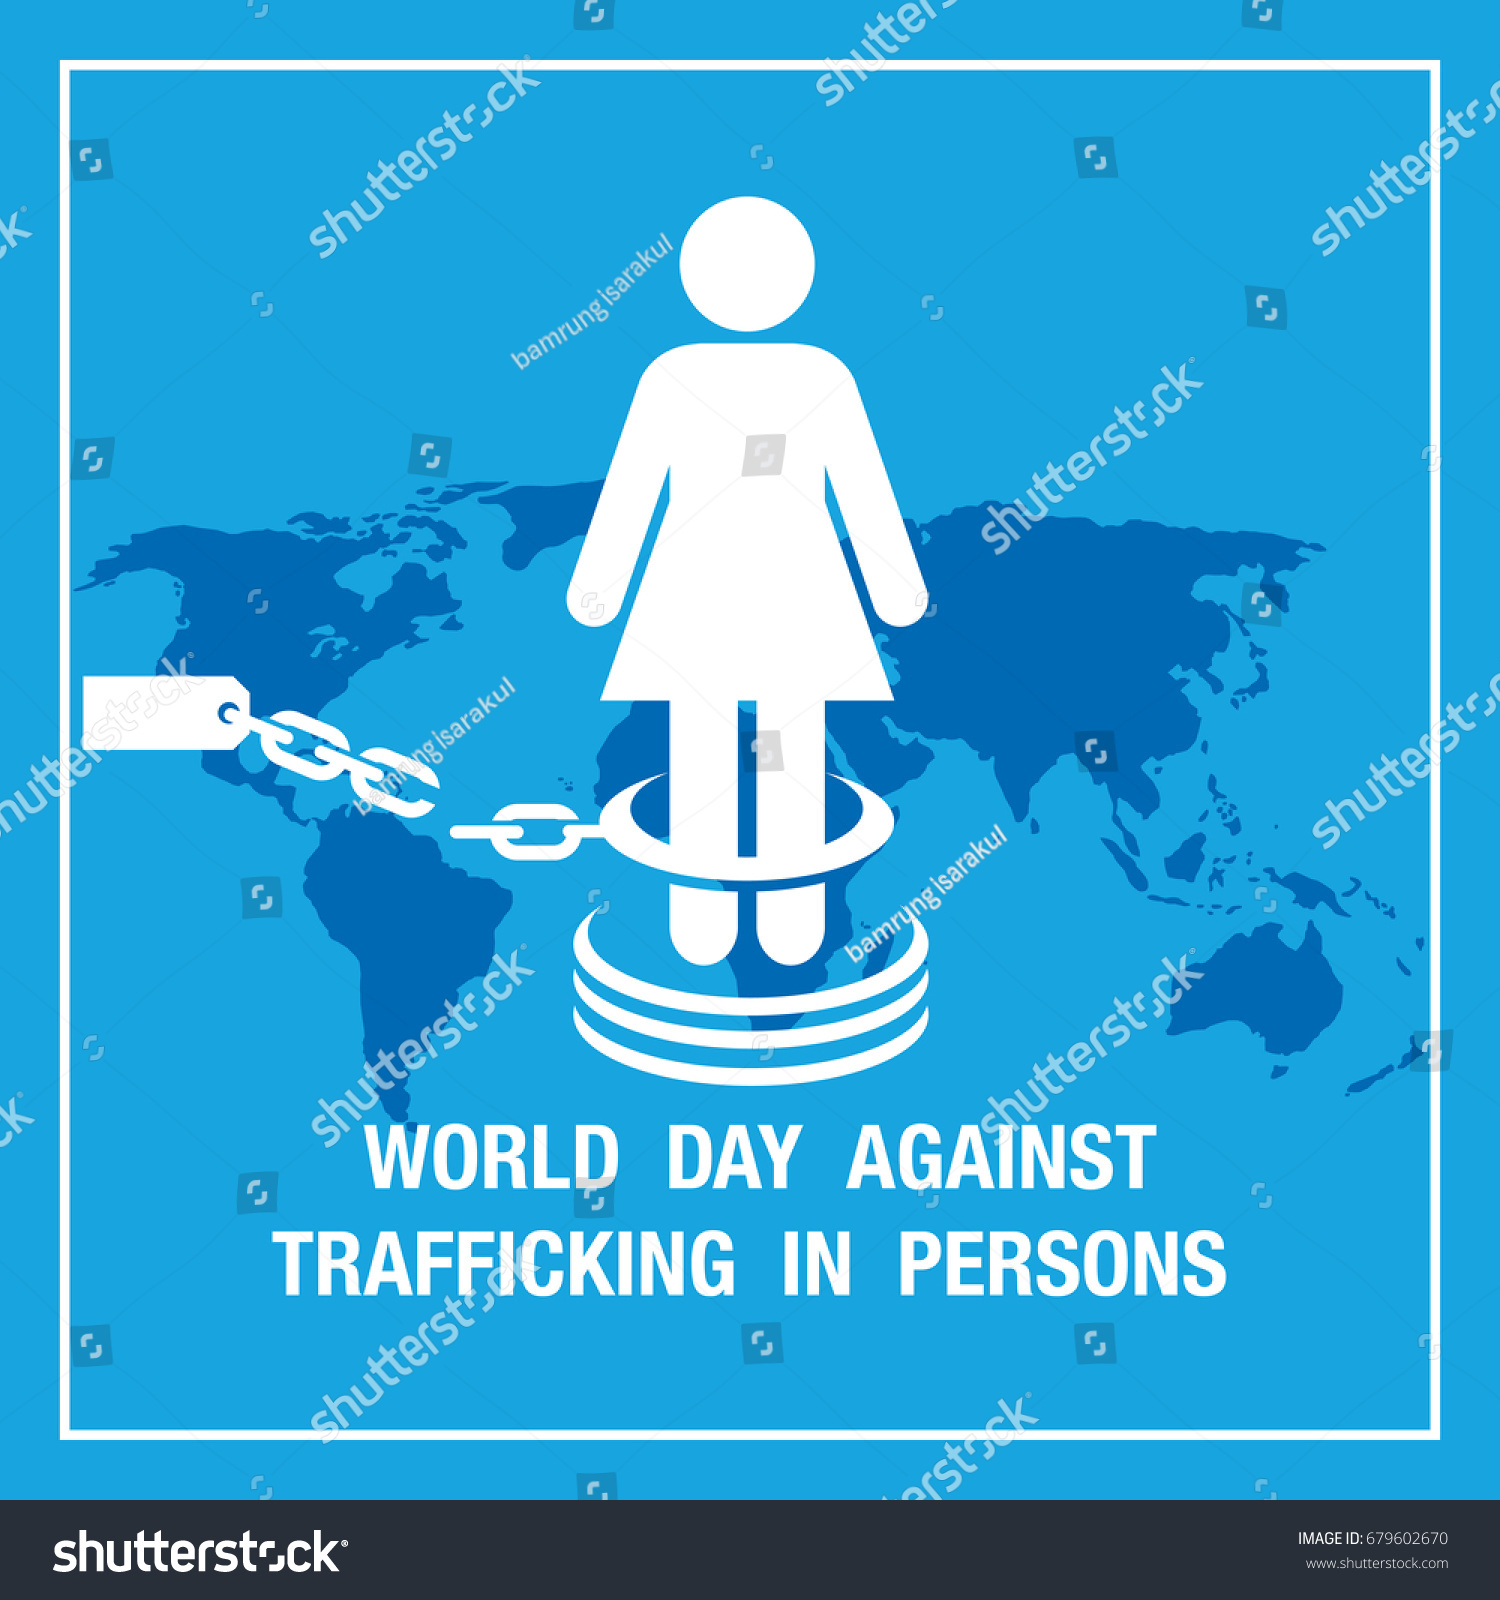 World Day Against Trafficking Persons Banner Stock Vector Royalty Free 679602670 Shutterstock 2648